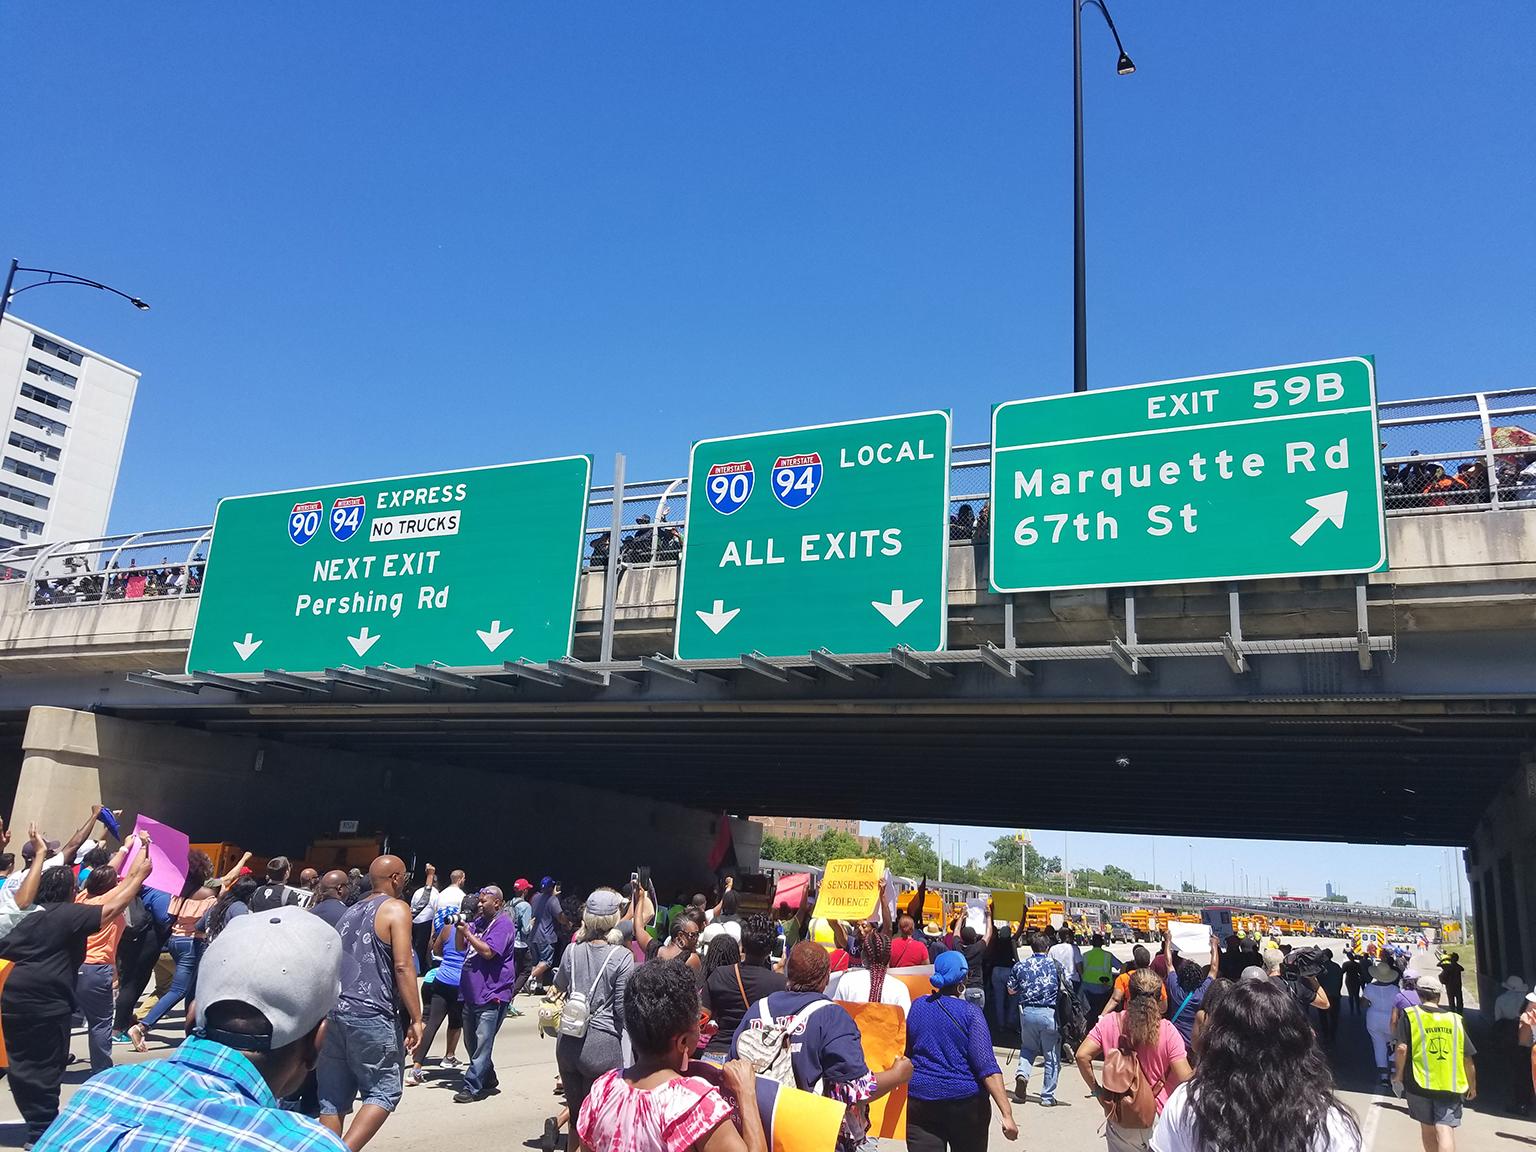 Protesters move into the home stretch Saturday under a 71st Street overpass filled with hundreds more onlookers. (Matt Masterson / Chicago Tonight)